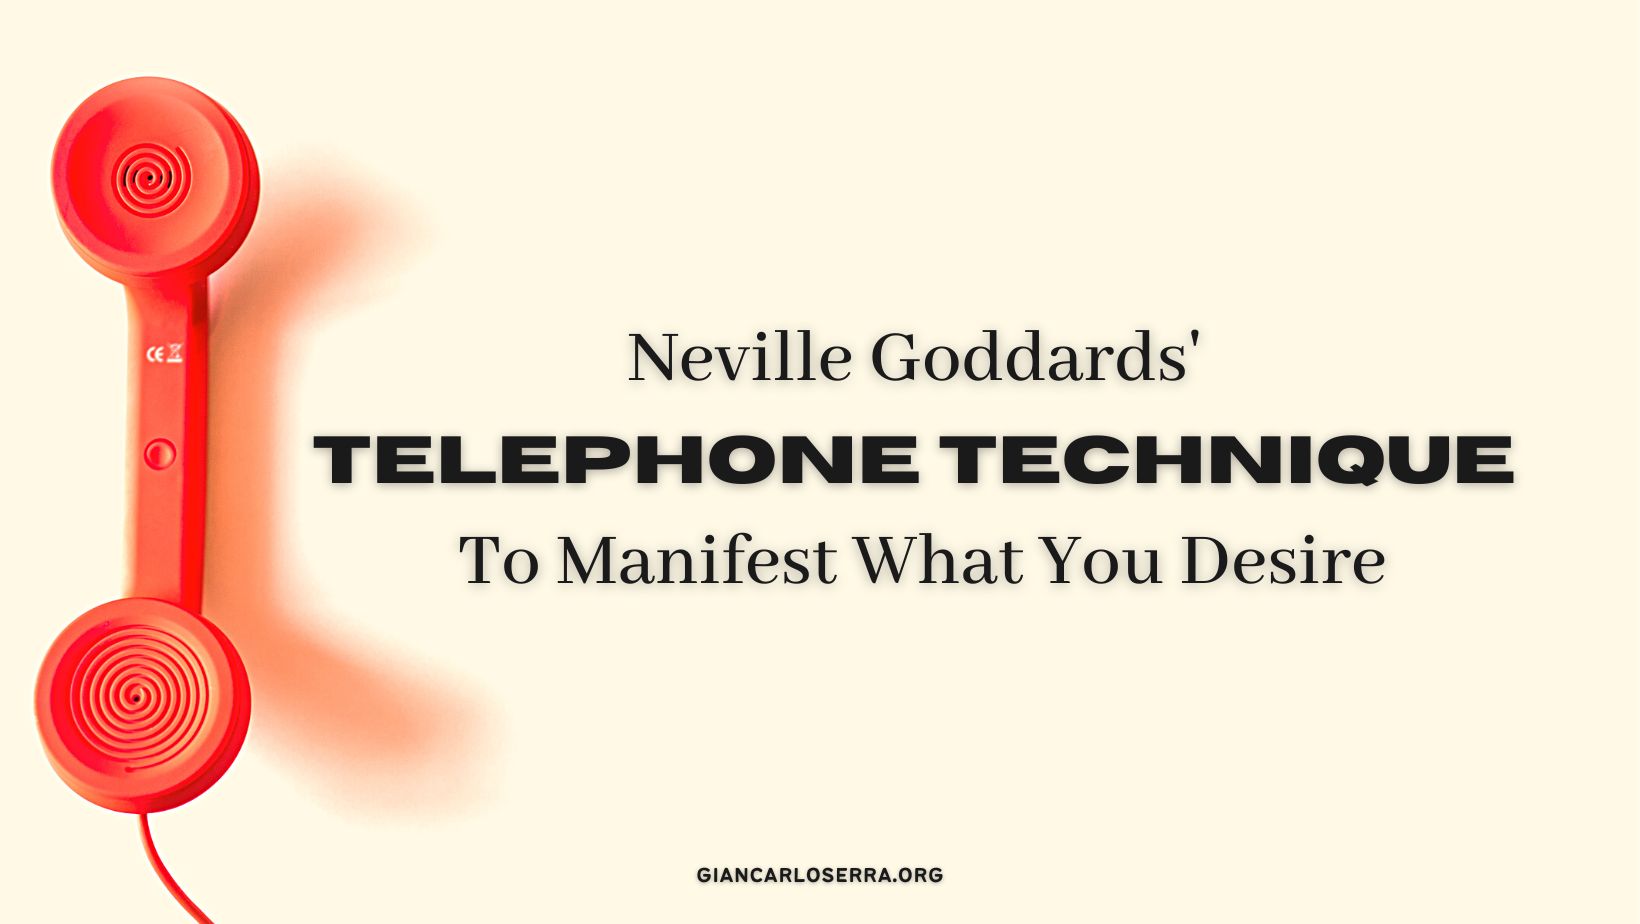 Neville Goddards' Telephone Technique To Manifest What You Desire